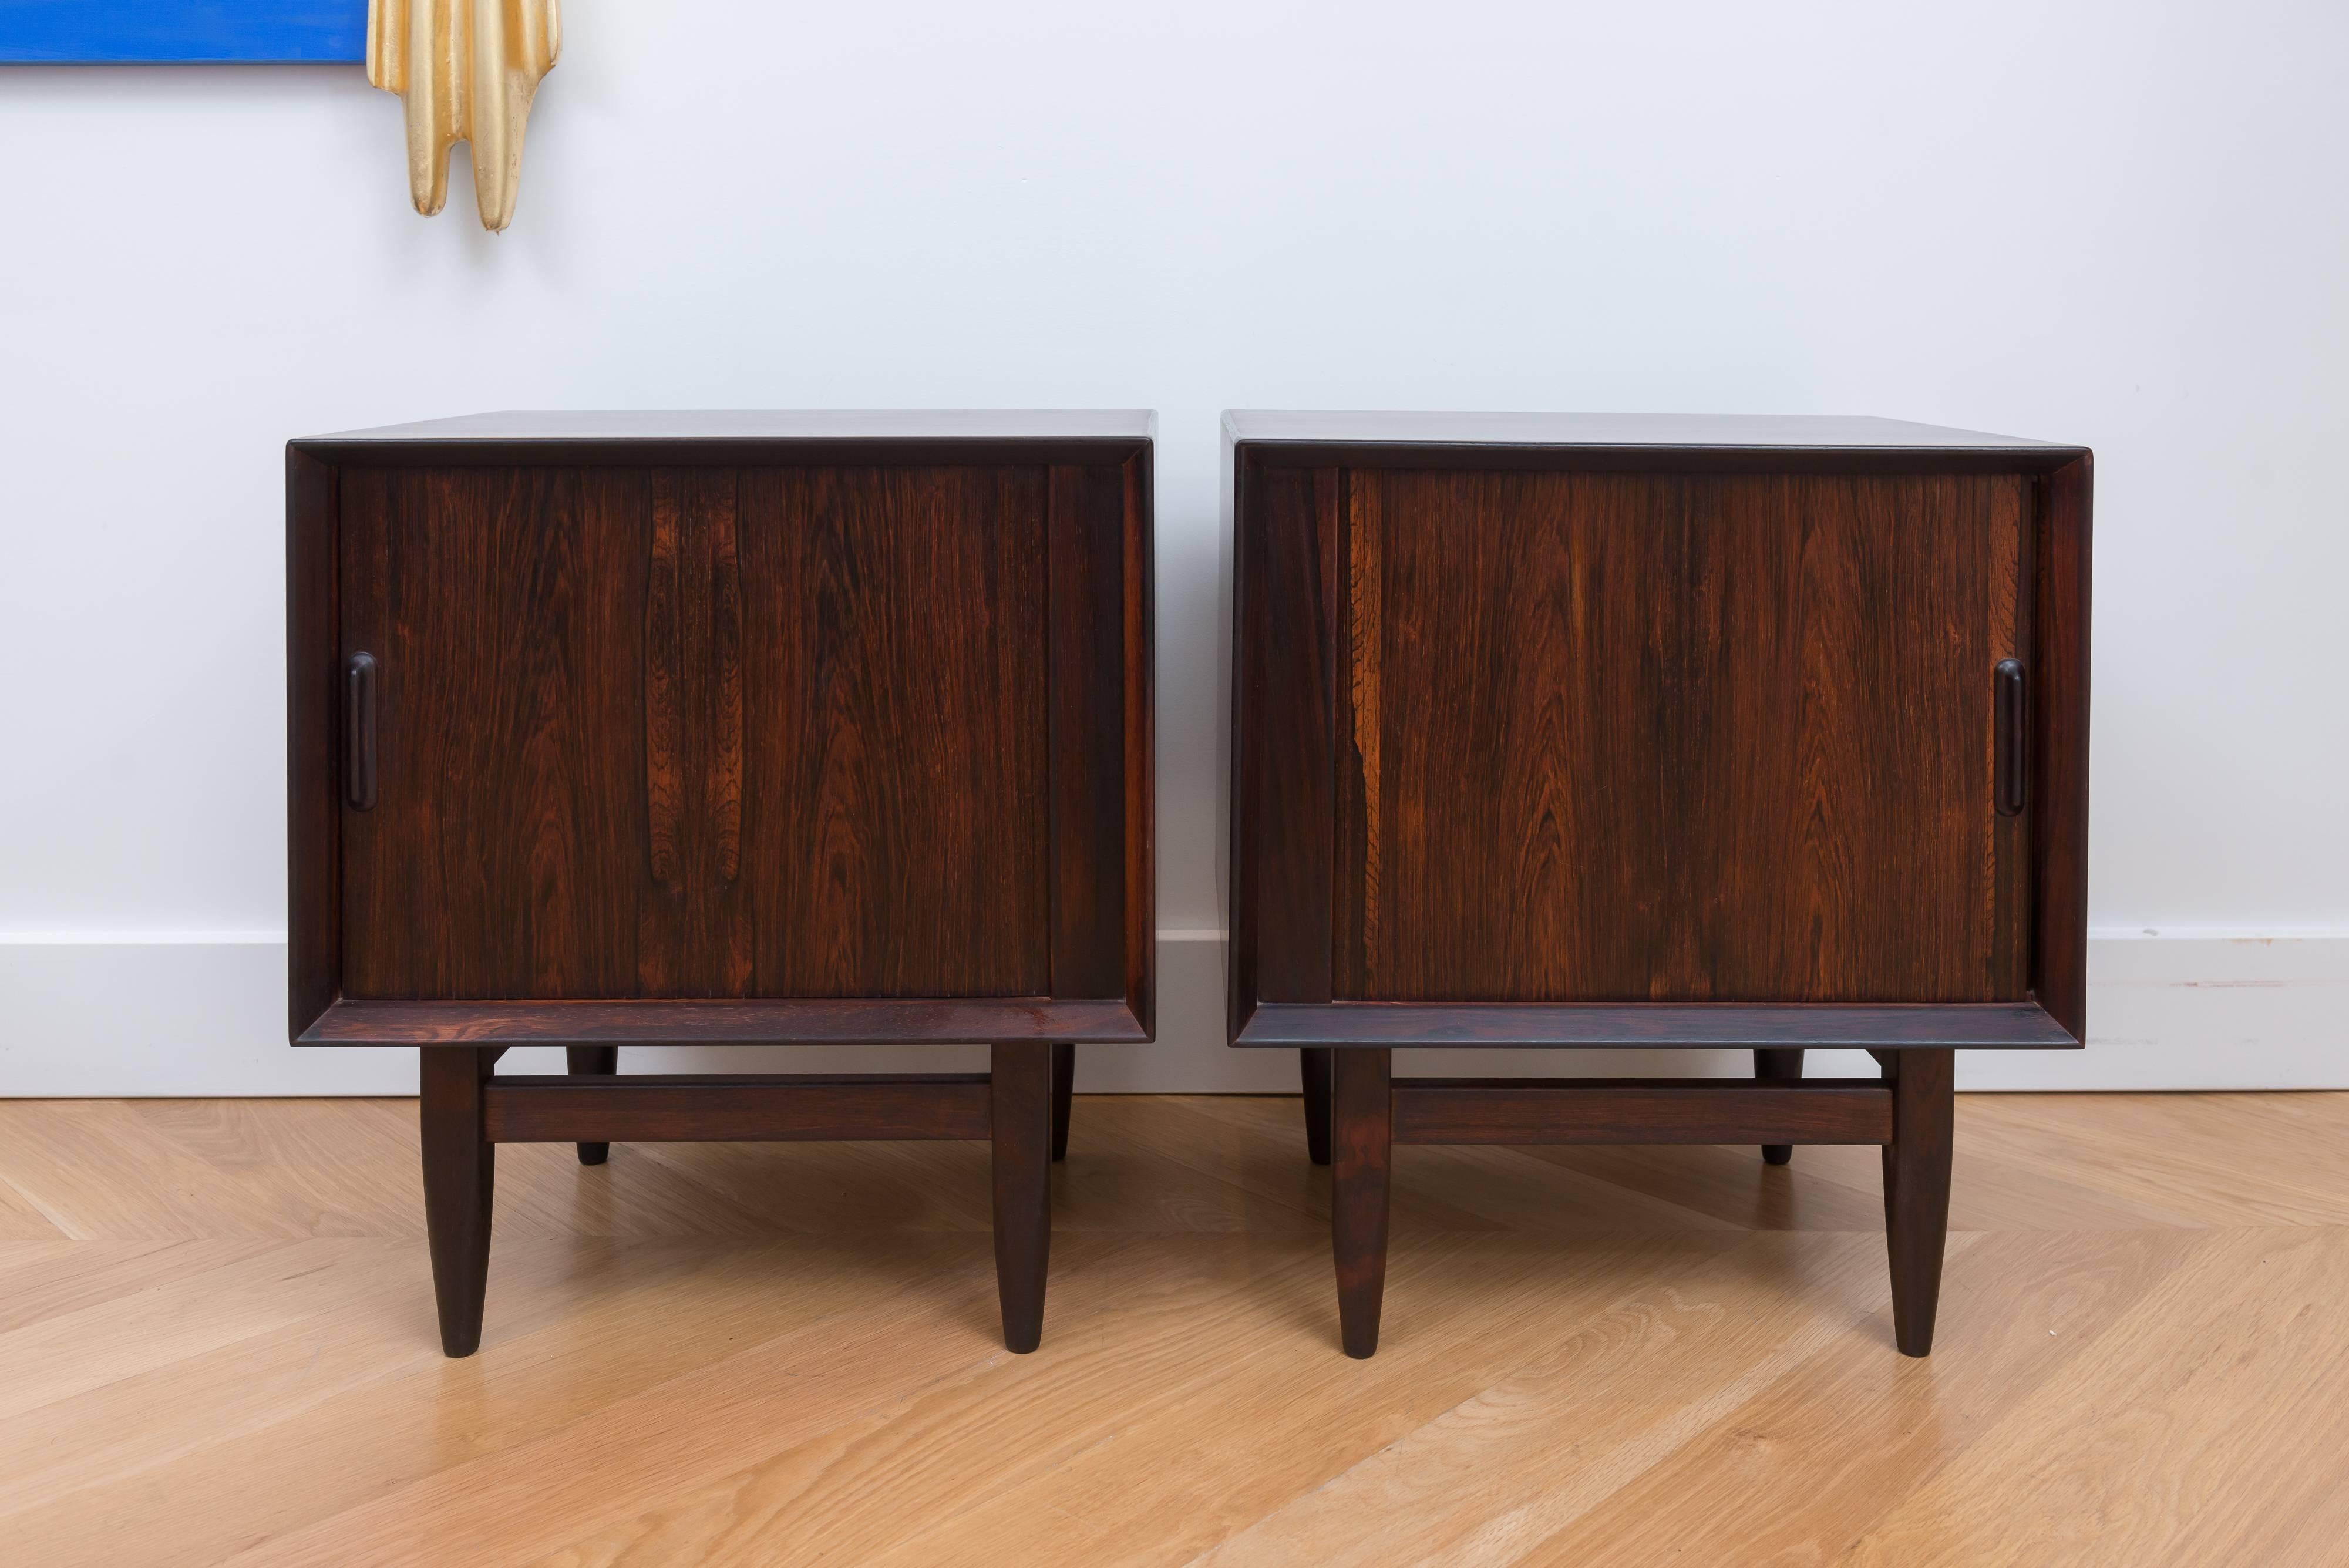 Pair of rosewood nightstands by Arne Wahl Iversen for Falster, circa 1958. Has a front tambour with an interior drawer, with an open storage space and an adjustable shelf. Solid construction also finished on the back.